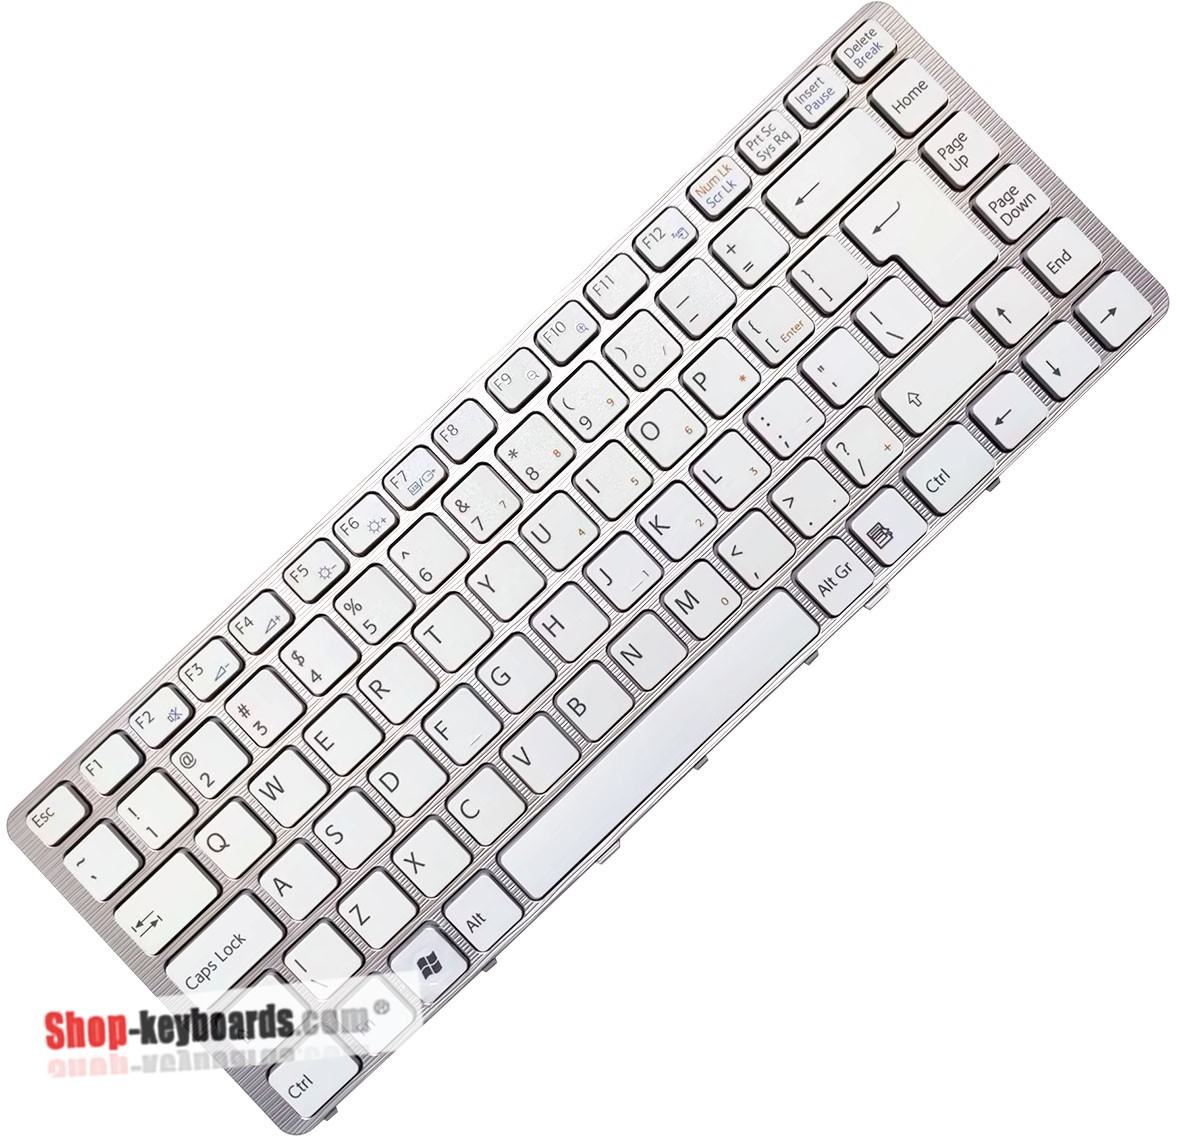 Sony Vaio VGN-NW125J Keyboard replacement